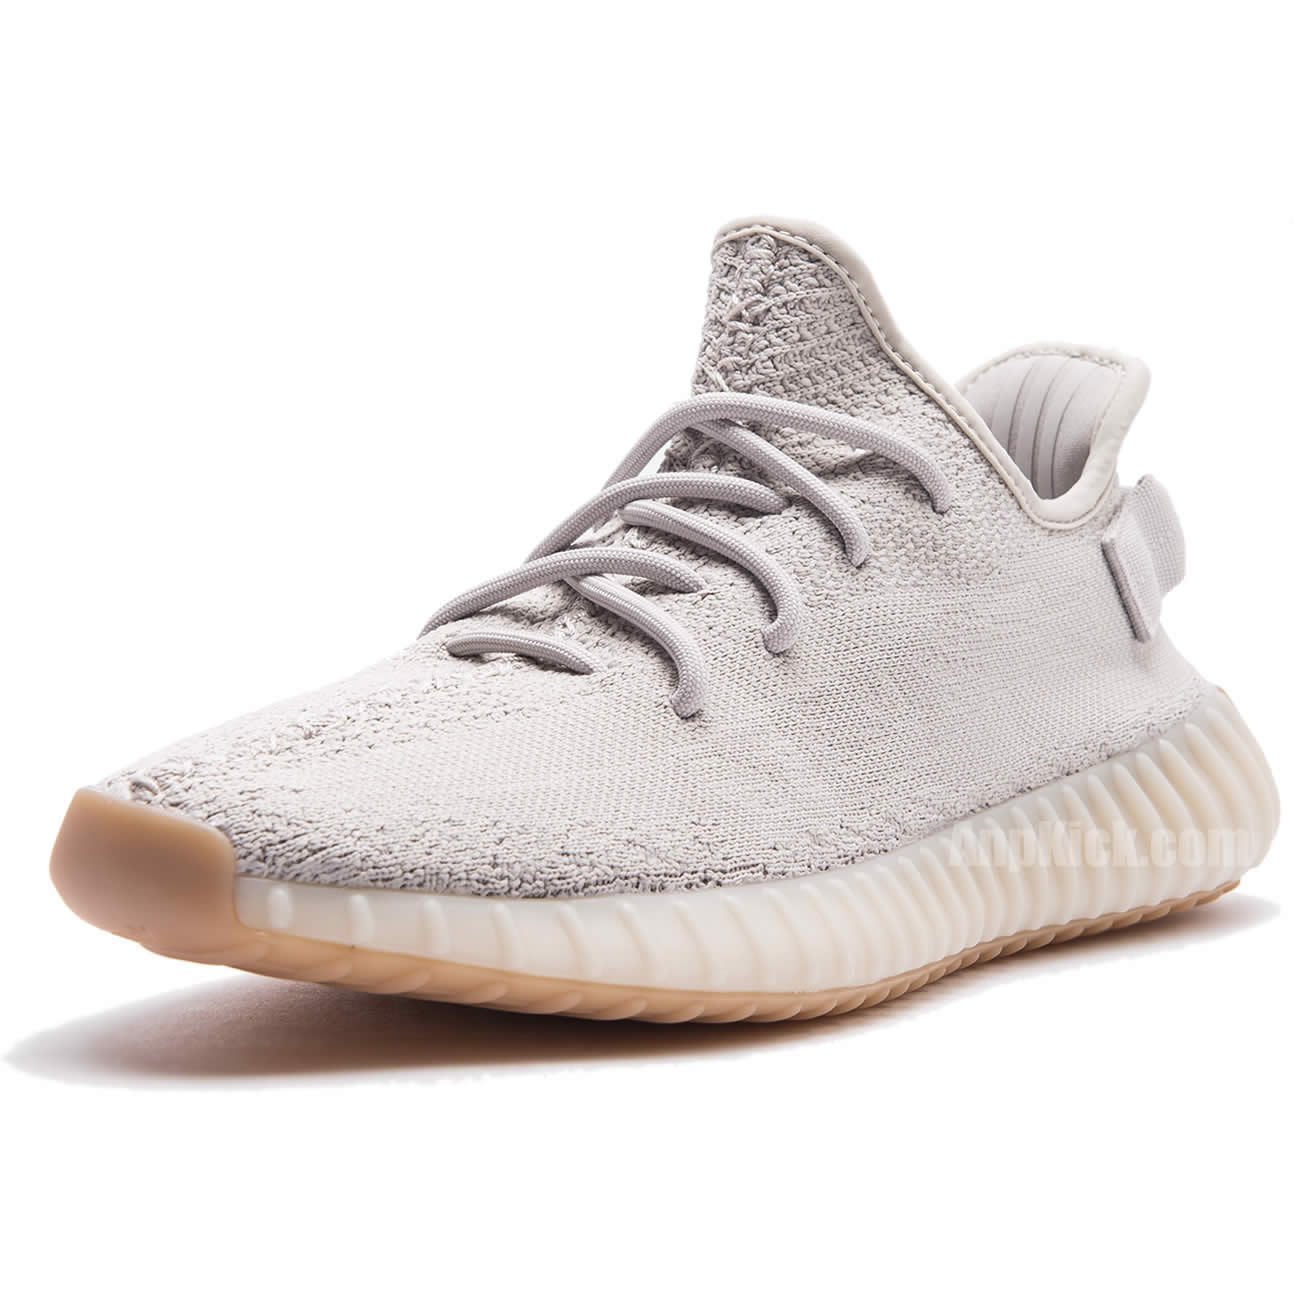 Yeezy Boost 350 V2 Sesame Price For Sale Outfit Release Date F99710